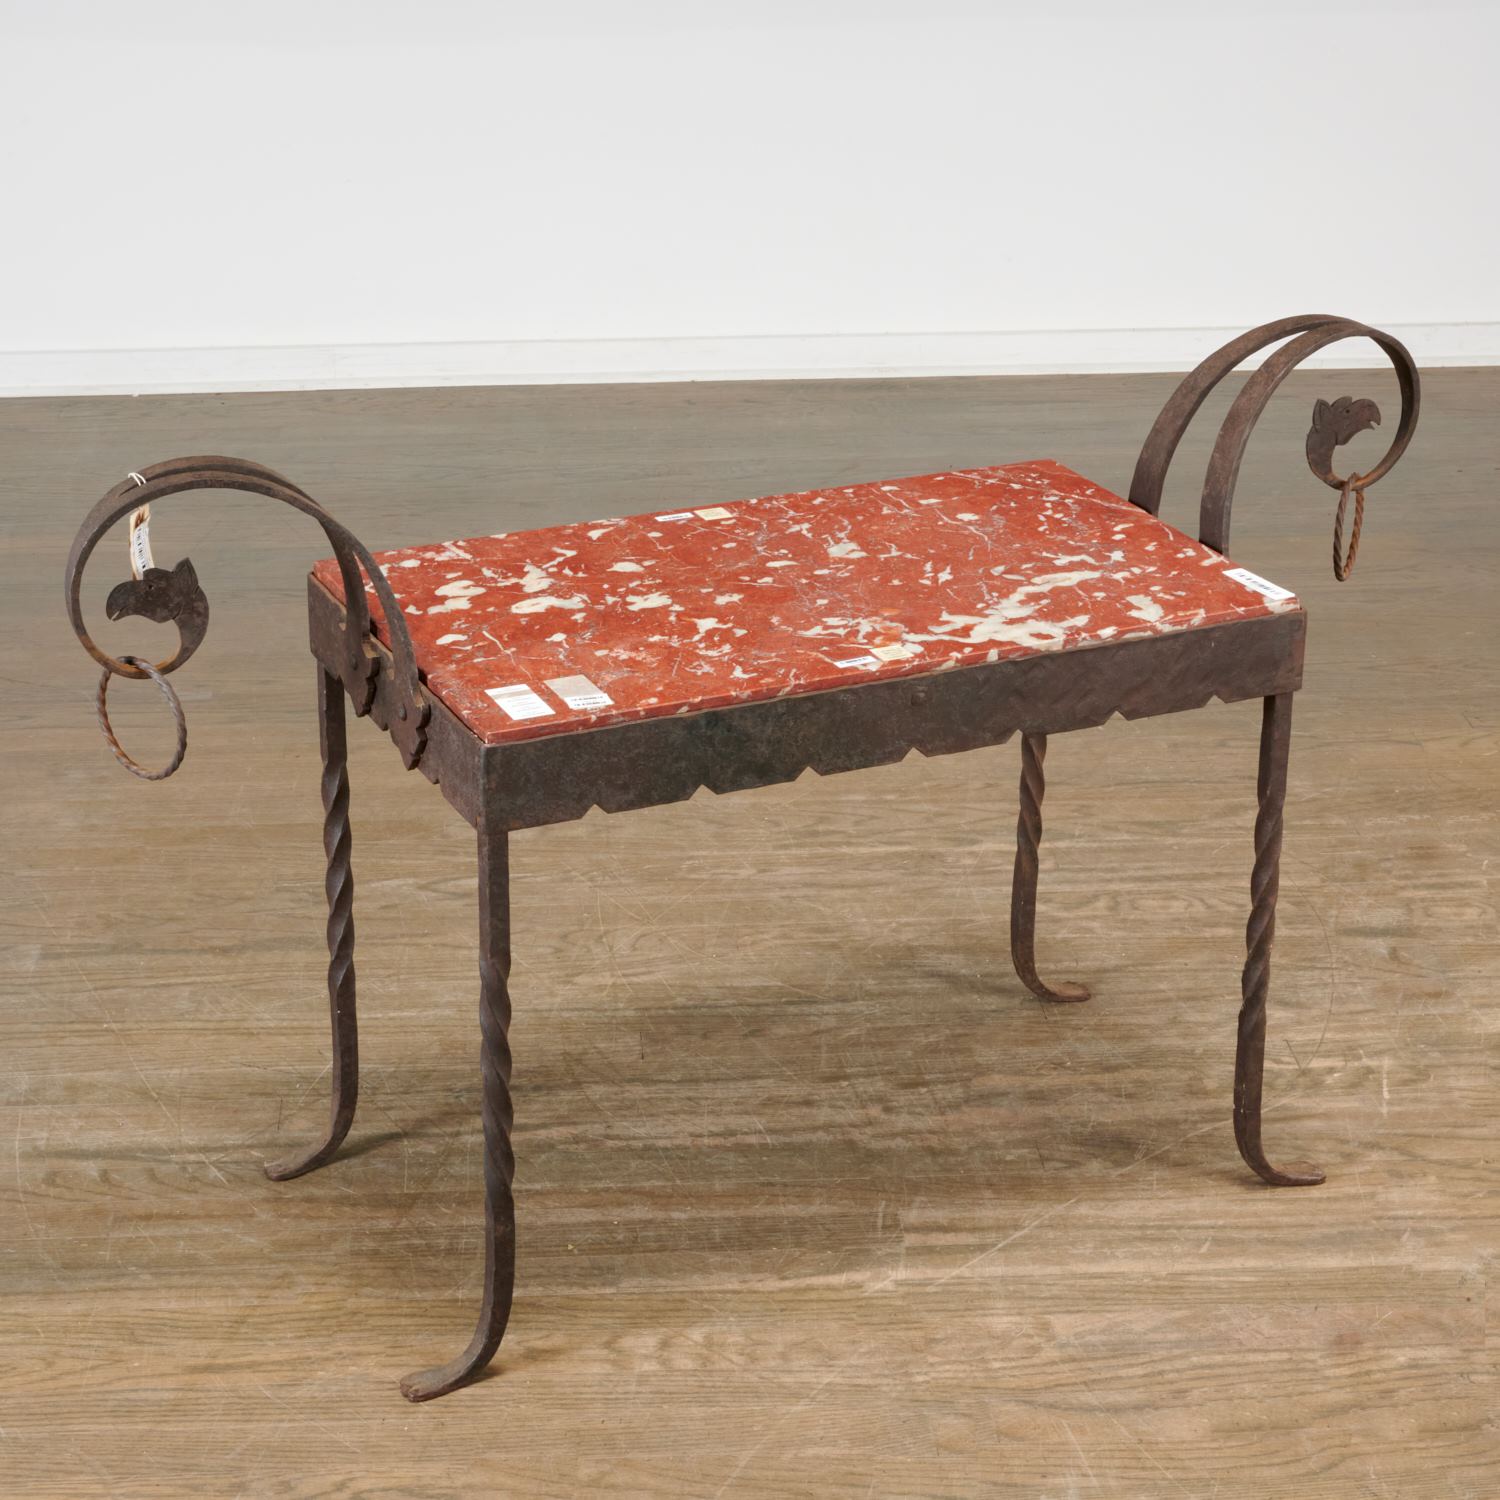 SPANISH REVIVAL WROUGHT IRON TABLE 2ce09a